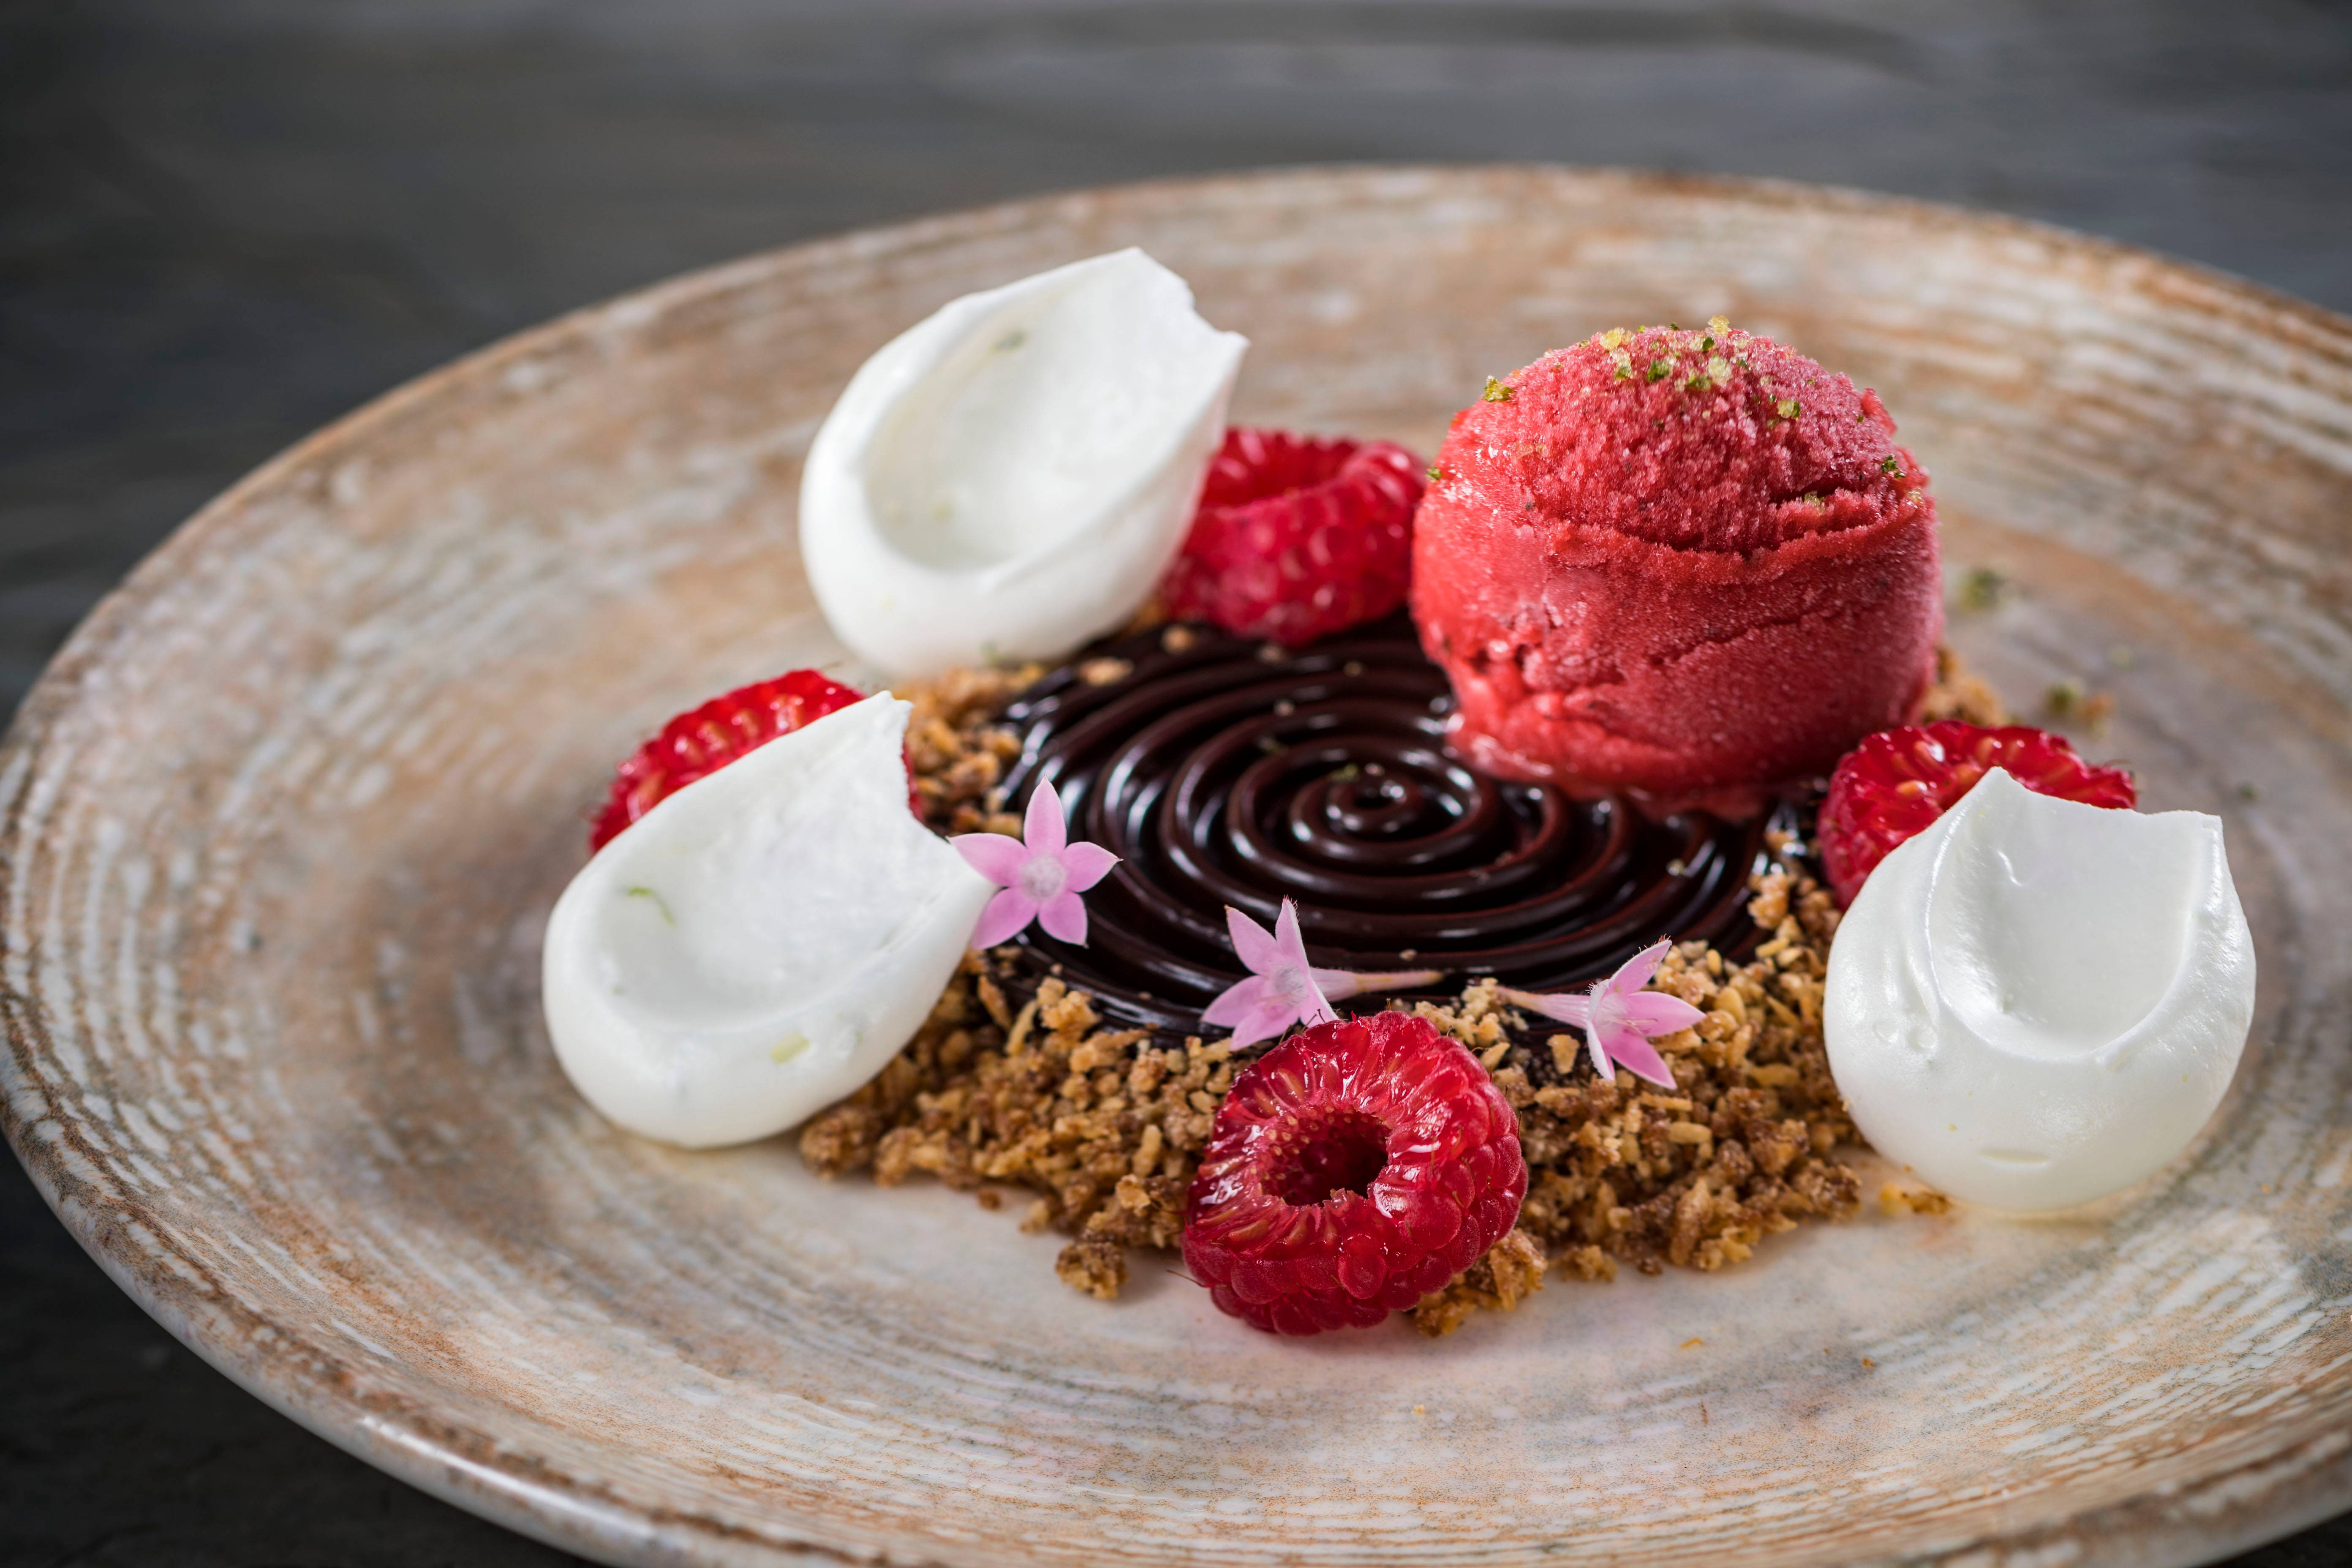 Plant Based Foods - Chocolate-Avocado Mouse with strawberry-basil sorbet and coconut crumble from Toledo – Tapas, Steak & Seafood at Gran Destino Tower